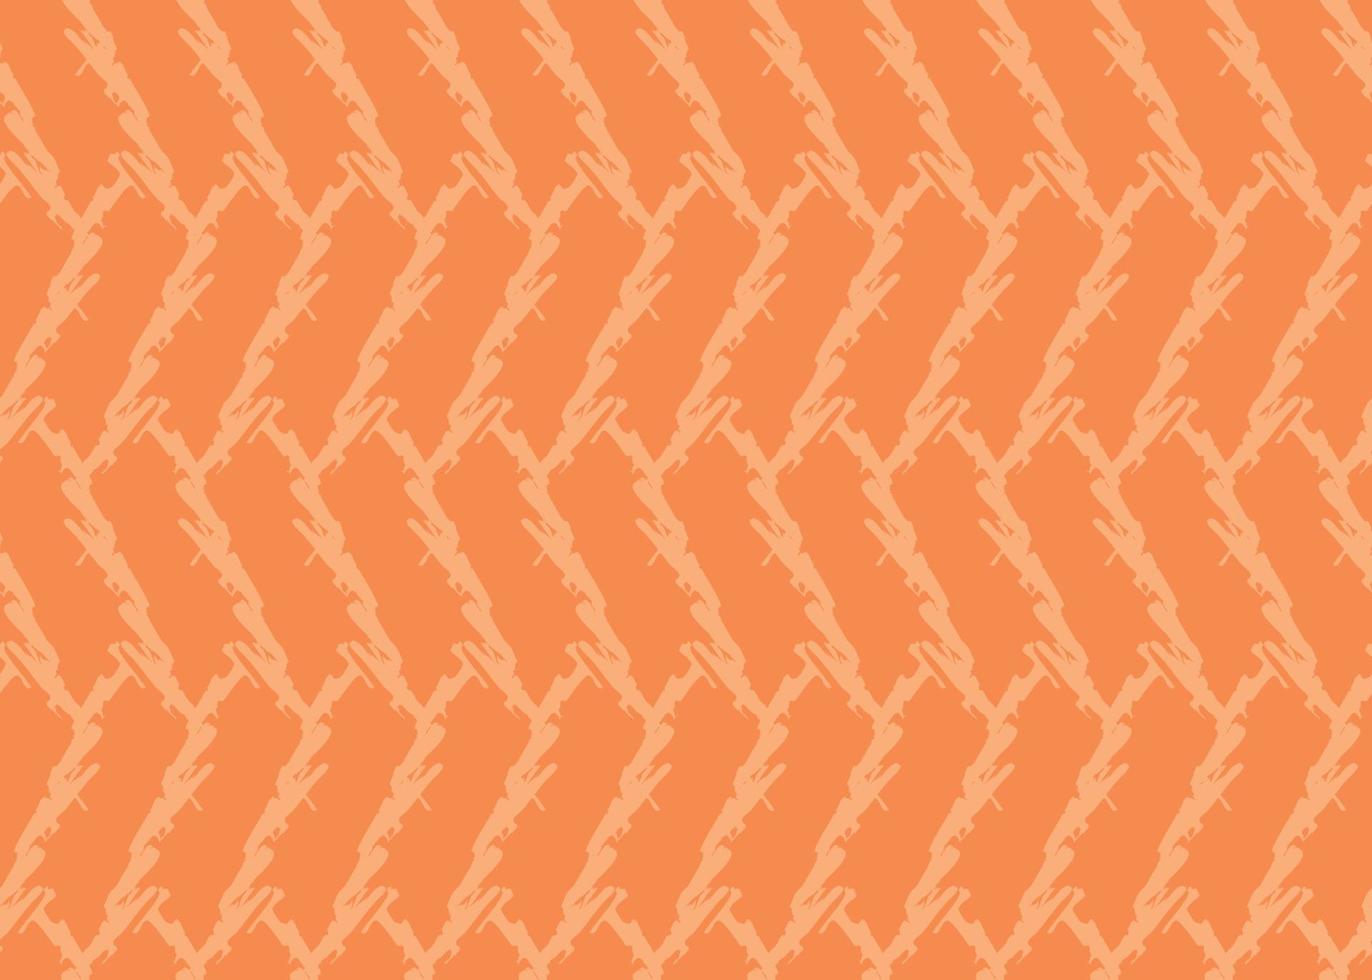 Vector texture background, seamless pattern. Hand drawn, orange colors.